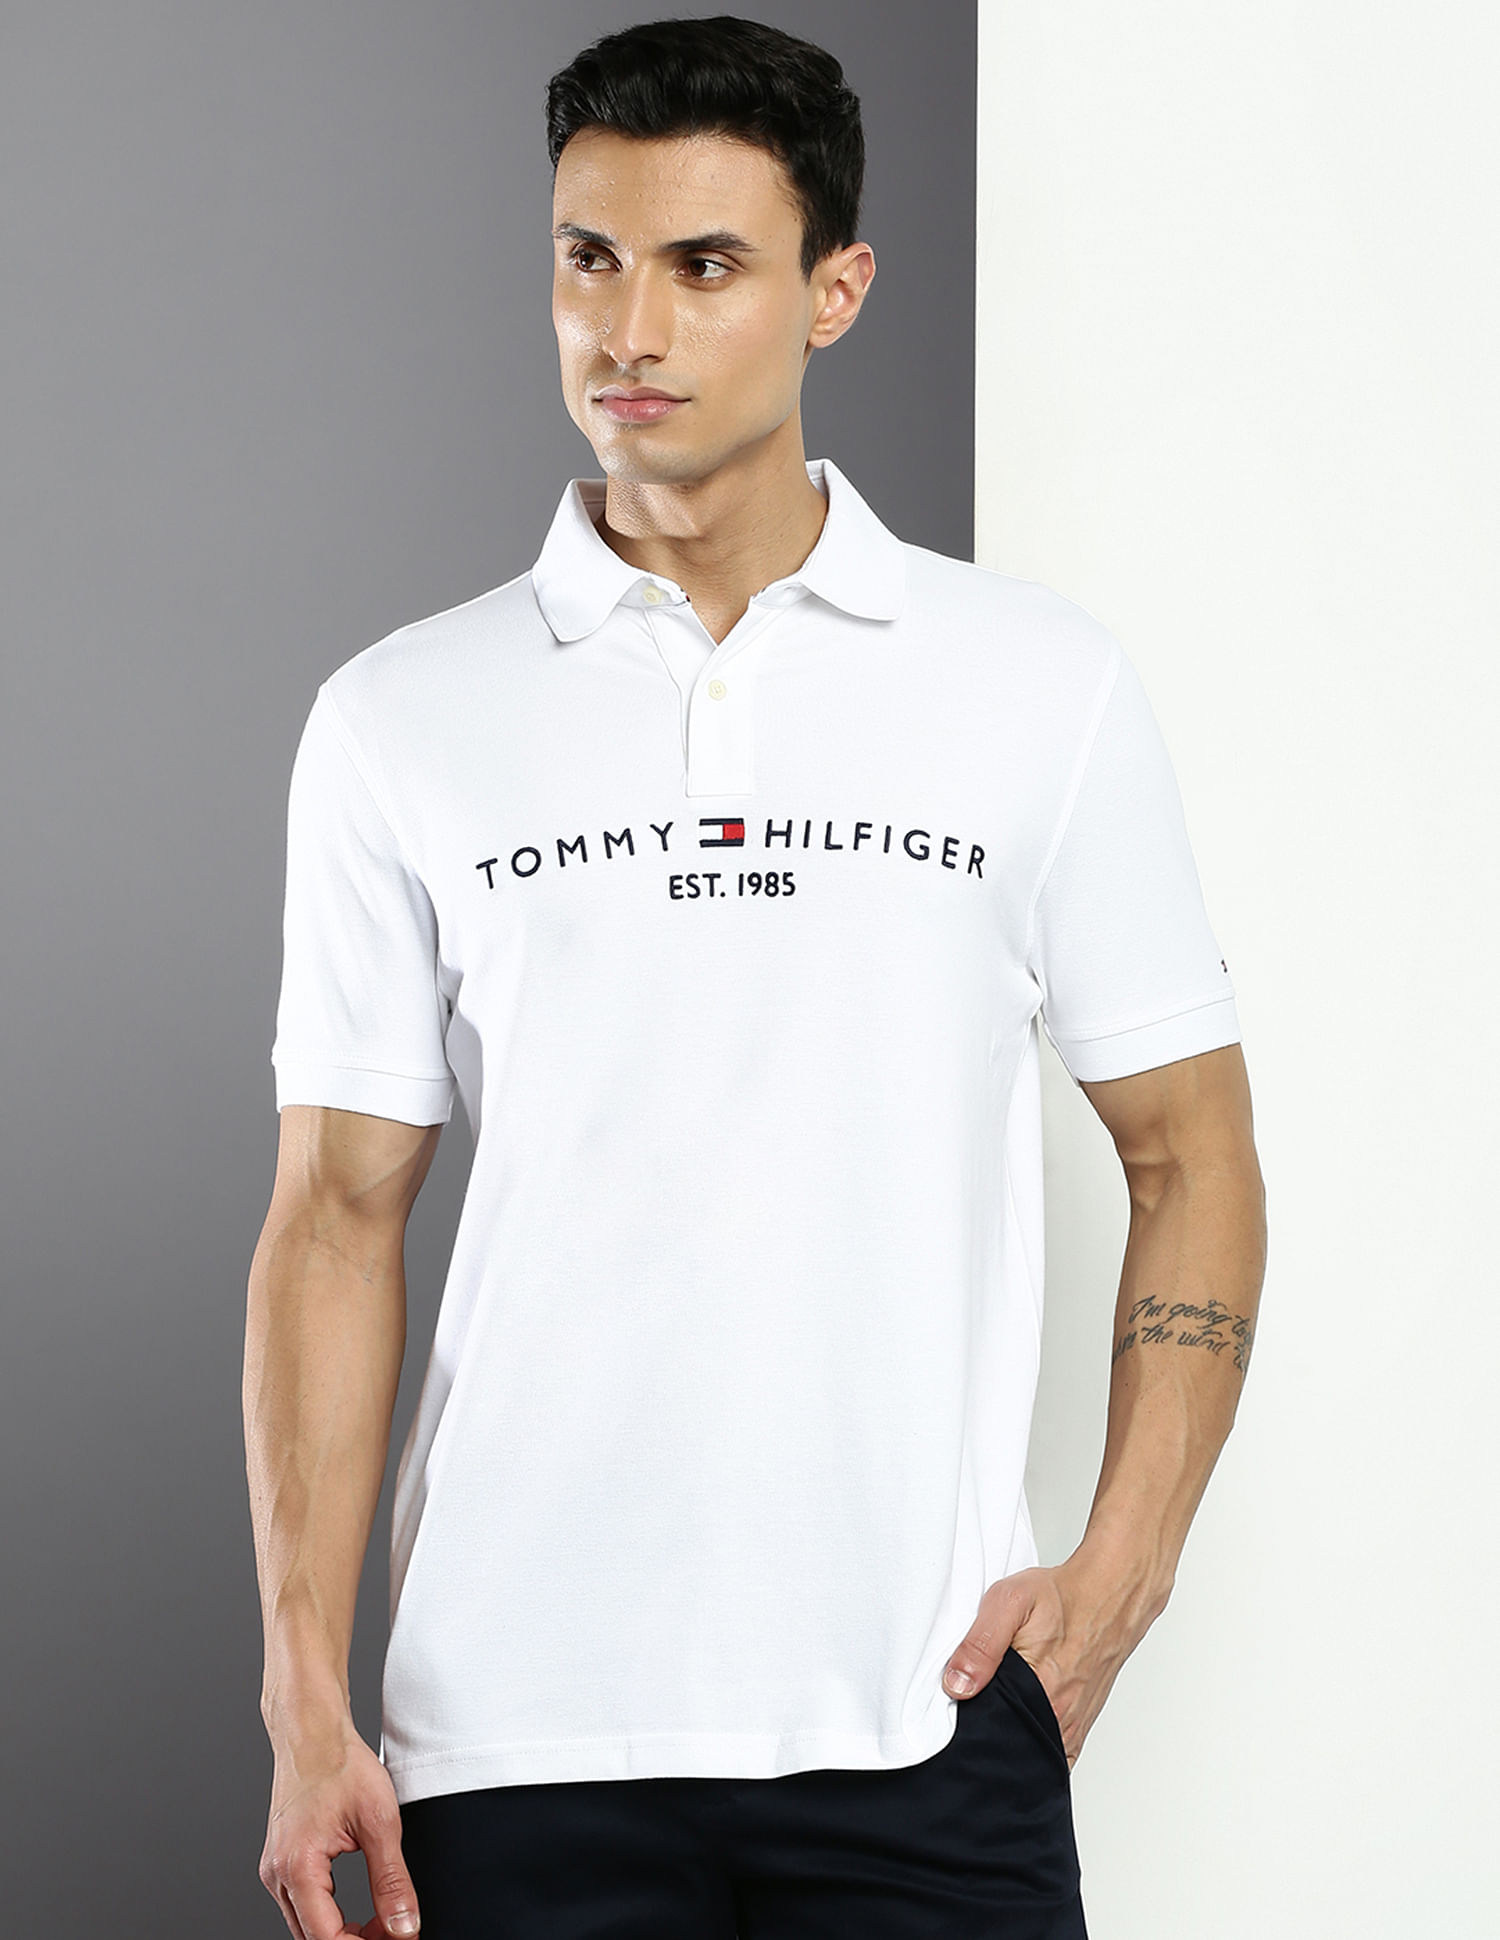 Hilfiger Polo Buy Pique Embroidered Logo Shirt Tommy